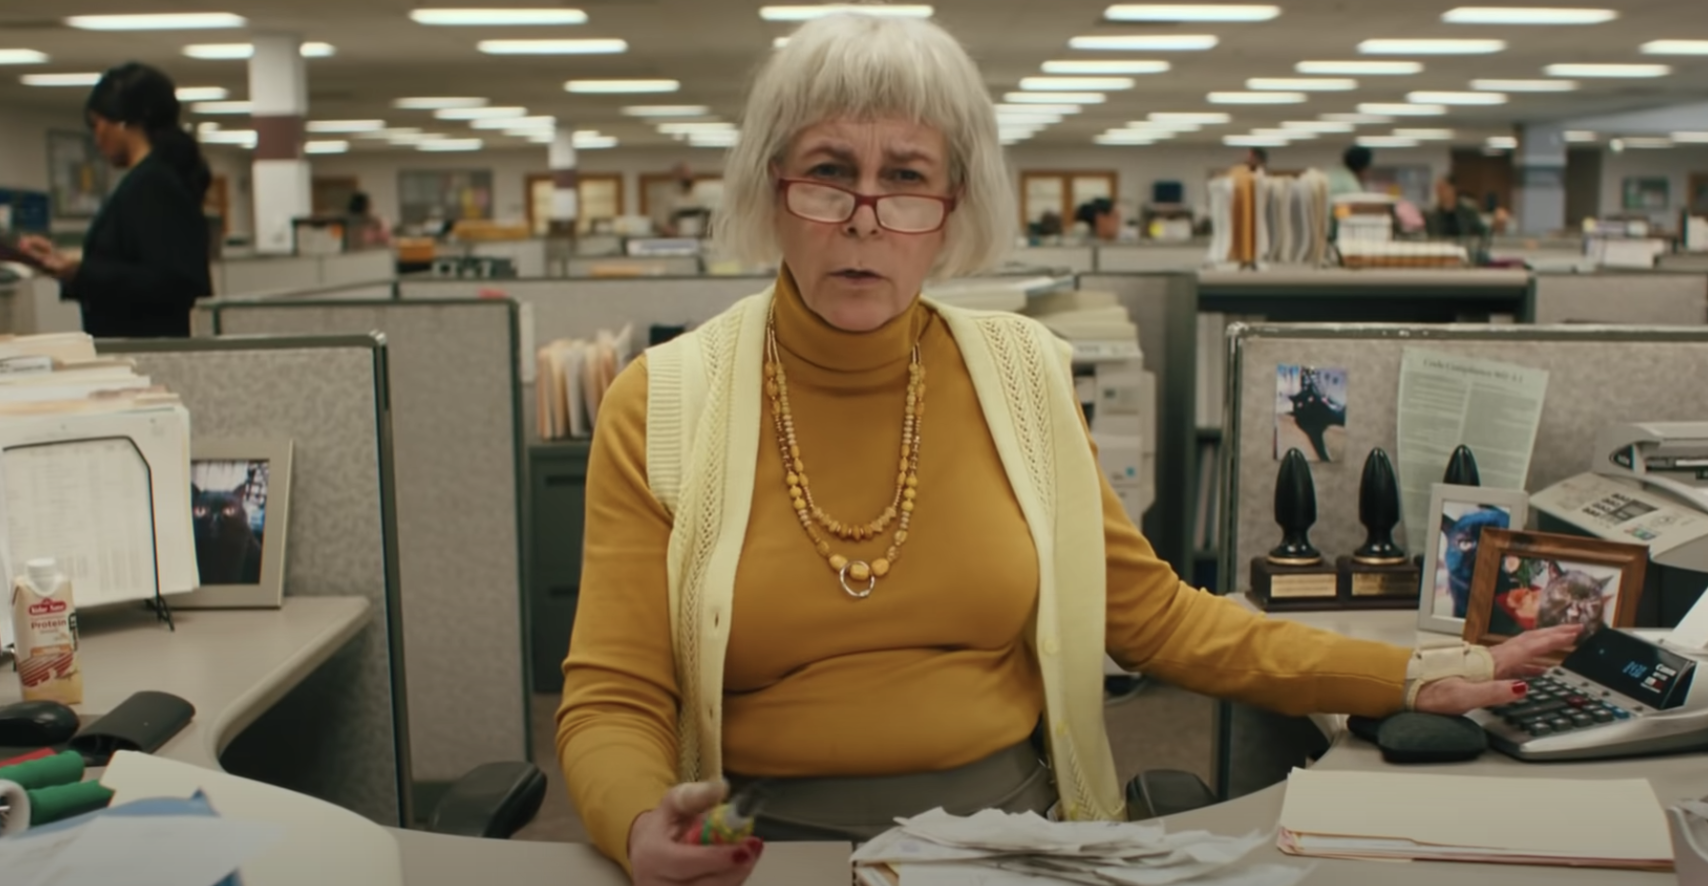 Jamie sits behind a desk in a short grey wig, opened sweater vest, not sucking in her stomach for her new role